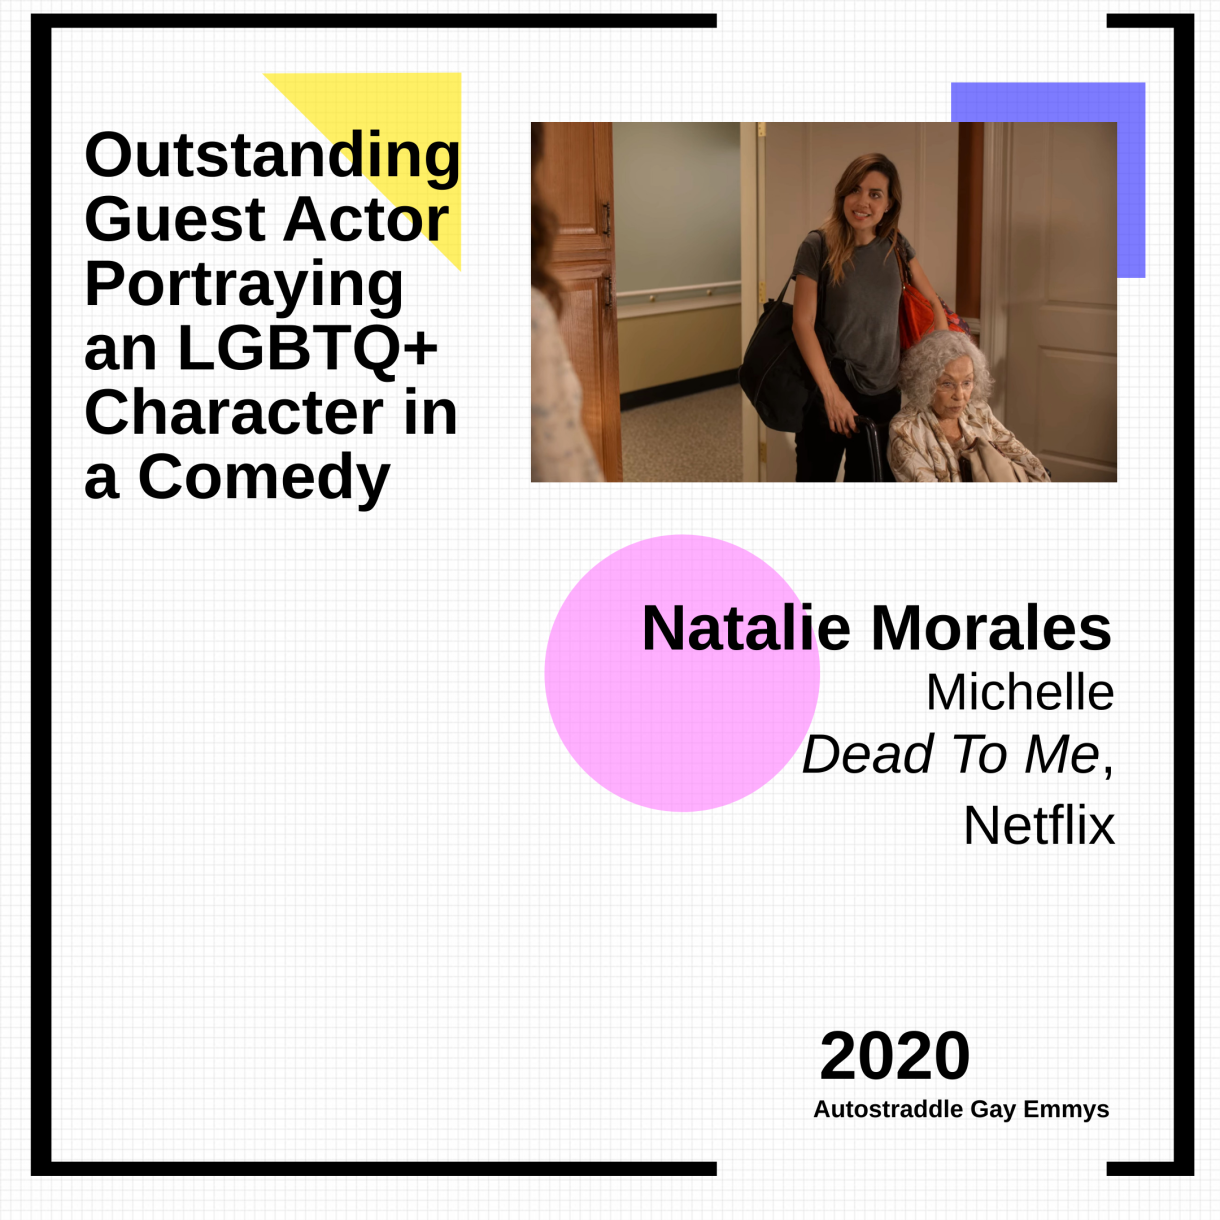 Colorful graphic announcing Outstanding Guest Actor Portraying an LGBTQ+ Character in a Comedy: Natalie Morales, Dead To Me. Picture of Michelle at a nursing home.